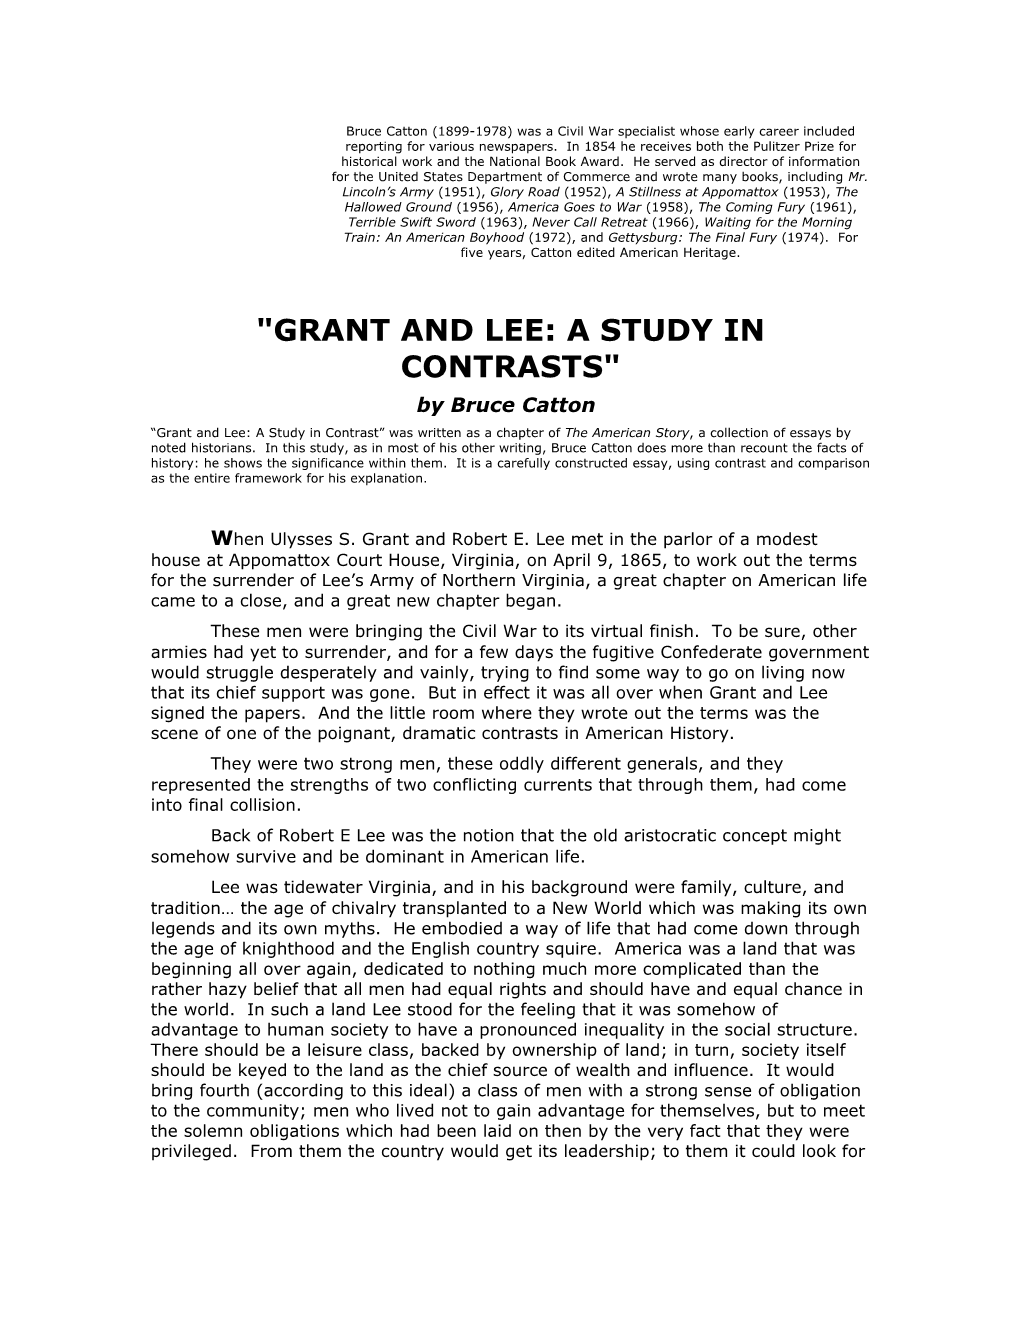 Grant and Lee: a Study in Contrasts